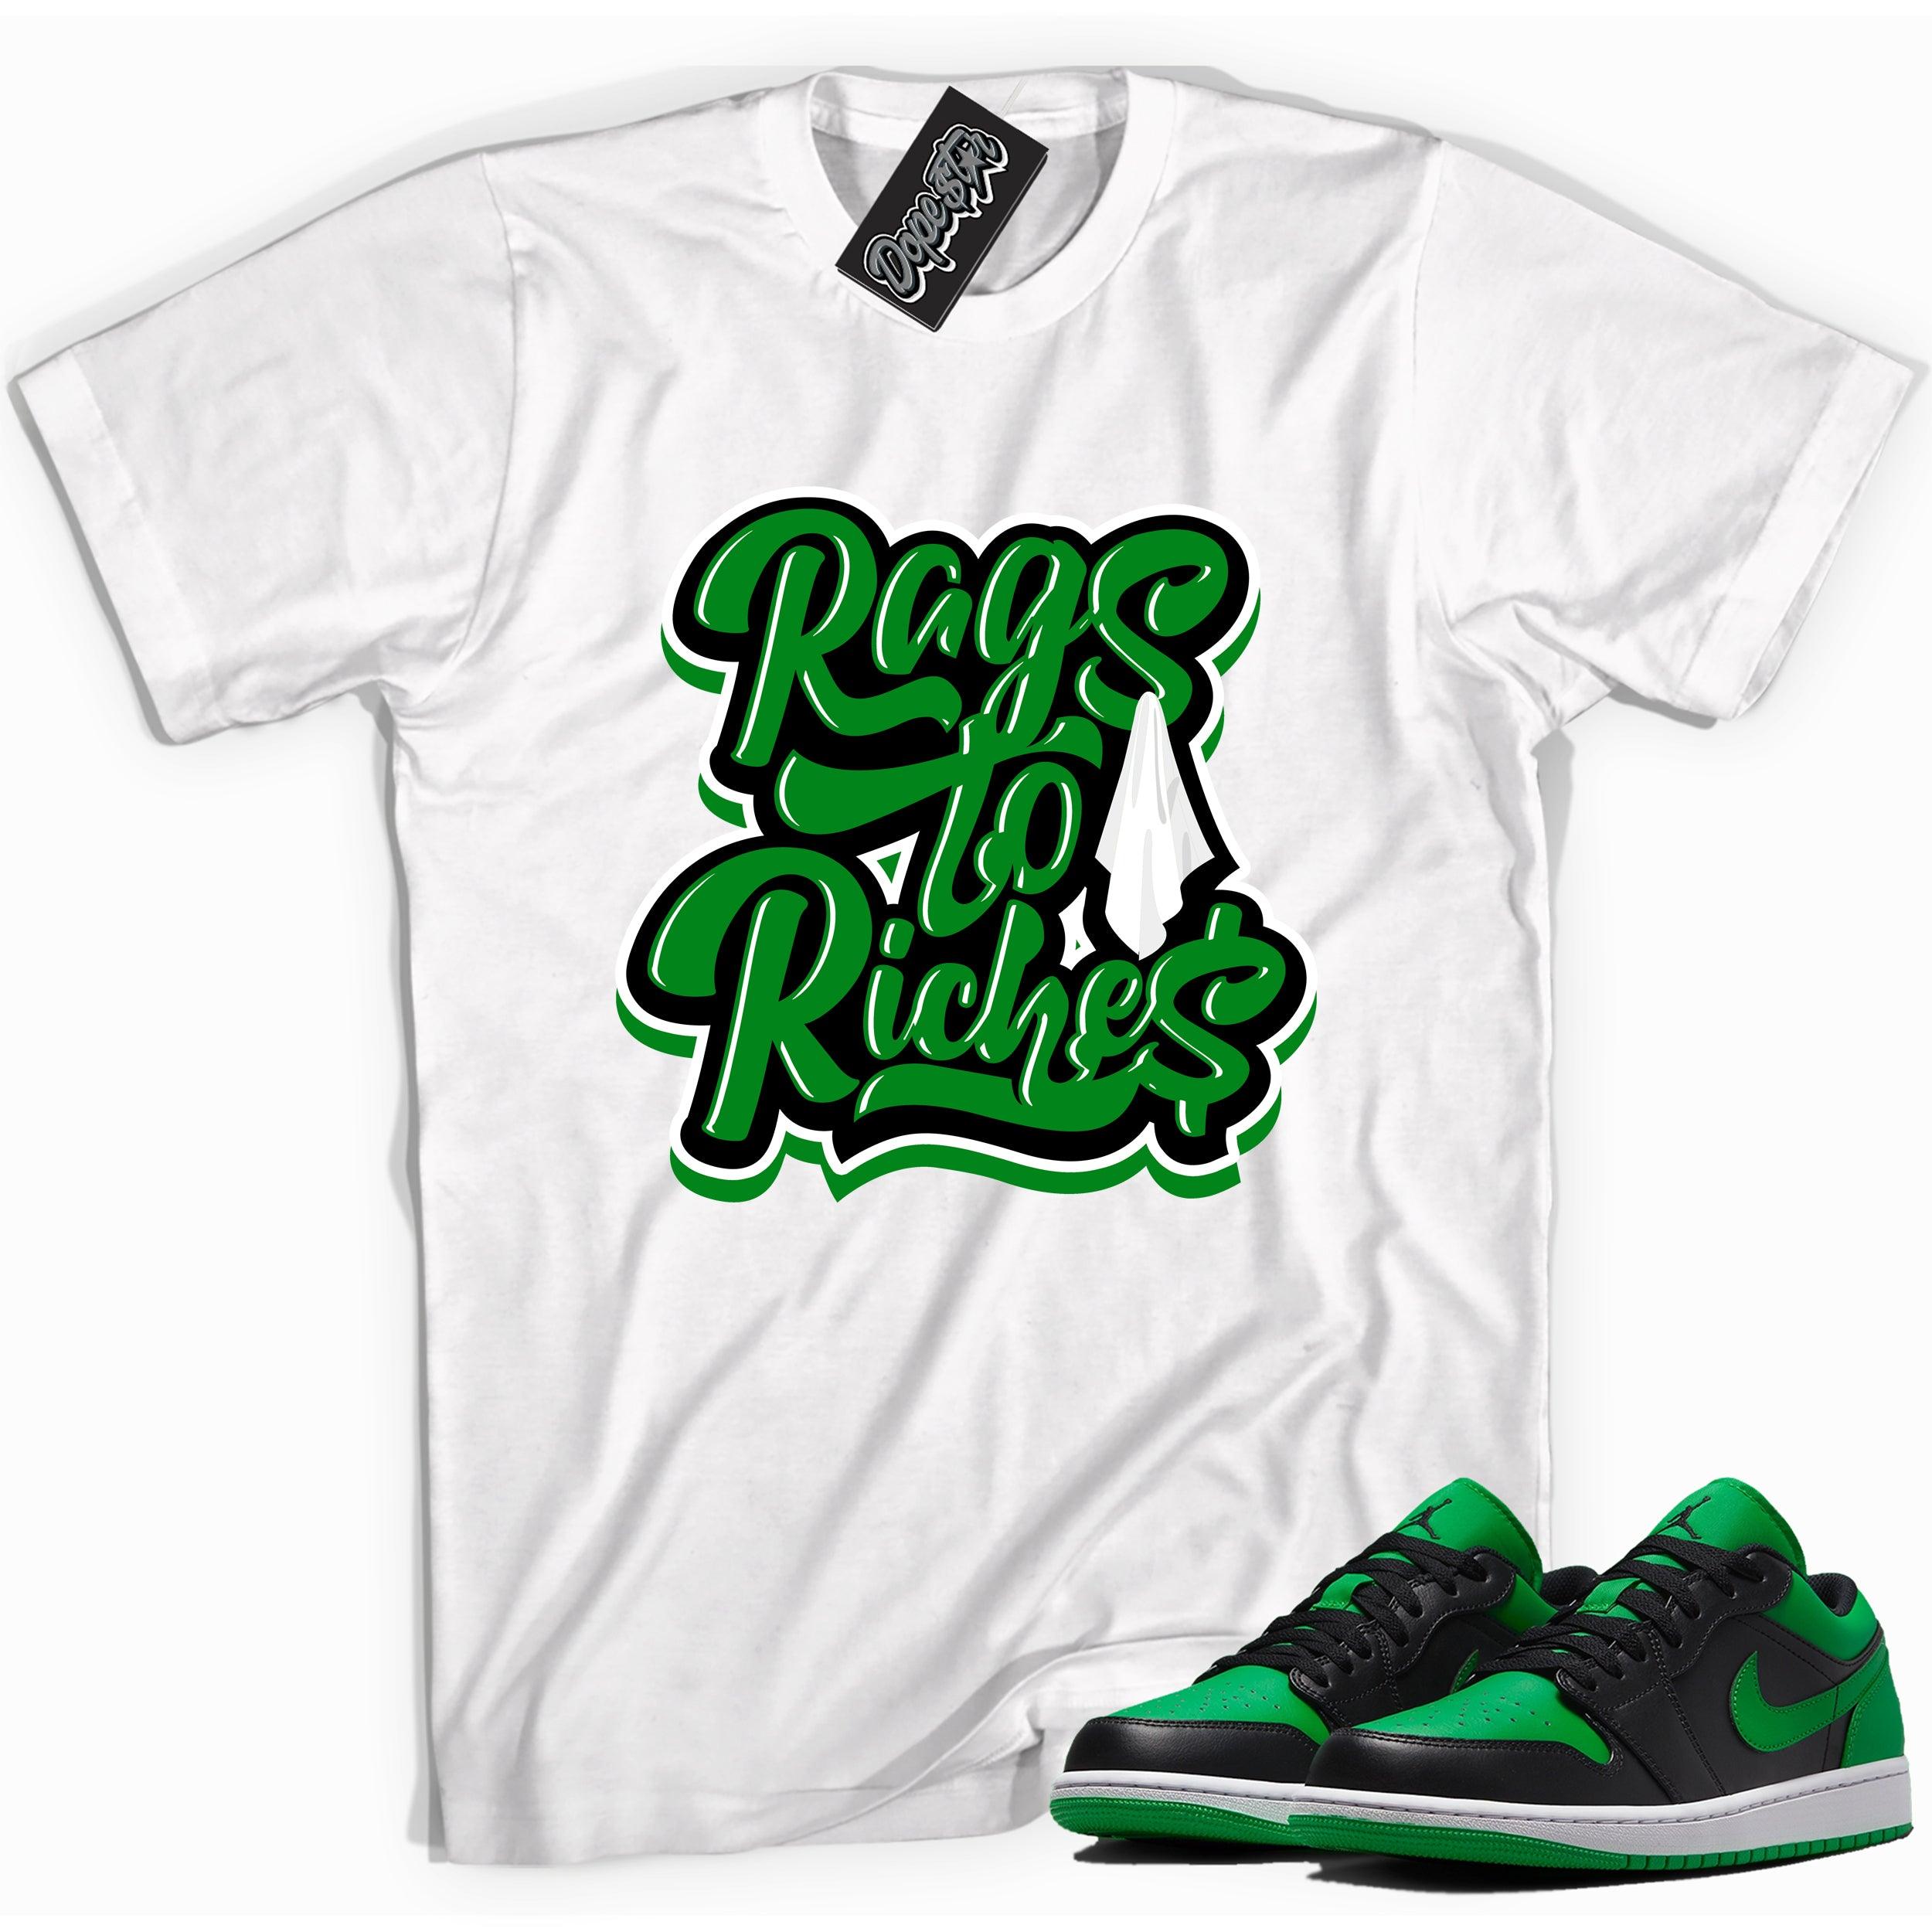 Cool white graphic tee with 'rags to riches' print, that perfectly matches Air Jordan 1 Low Lucky Green sneakers